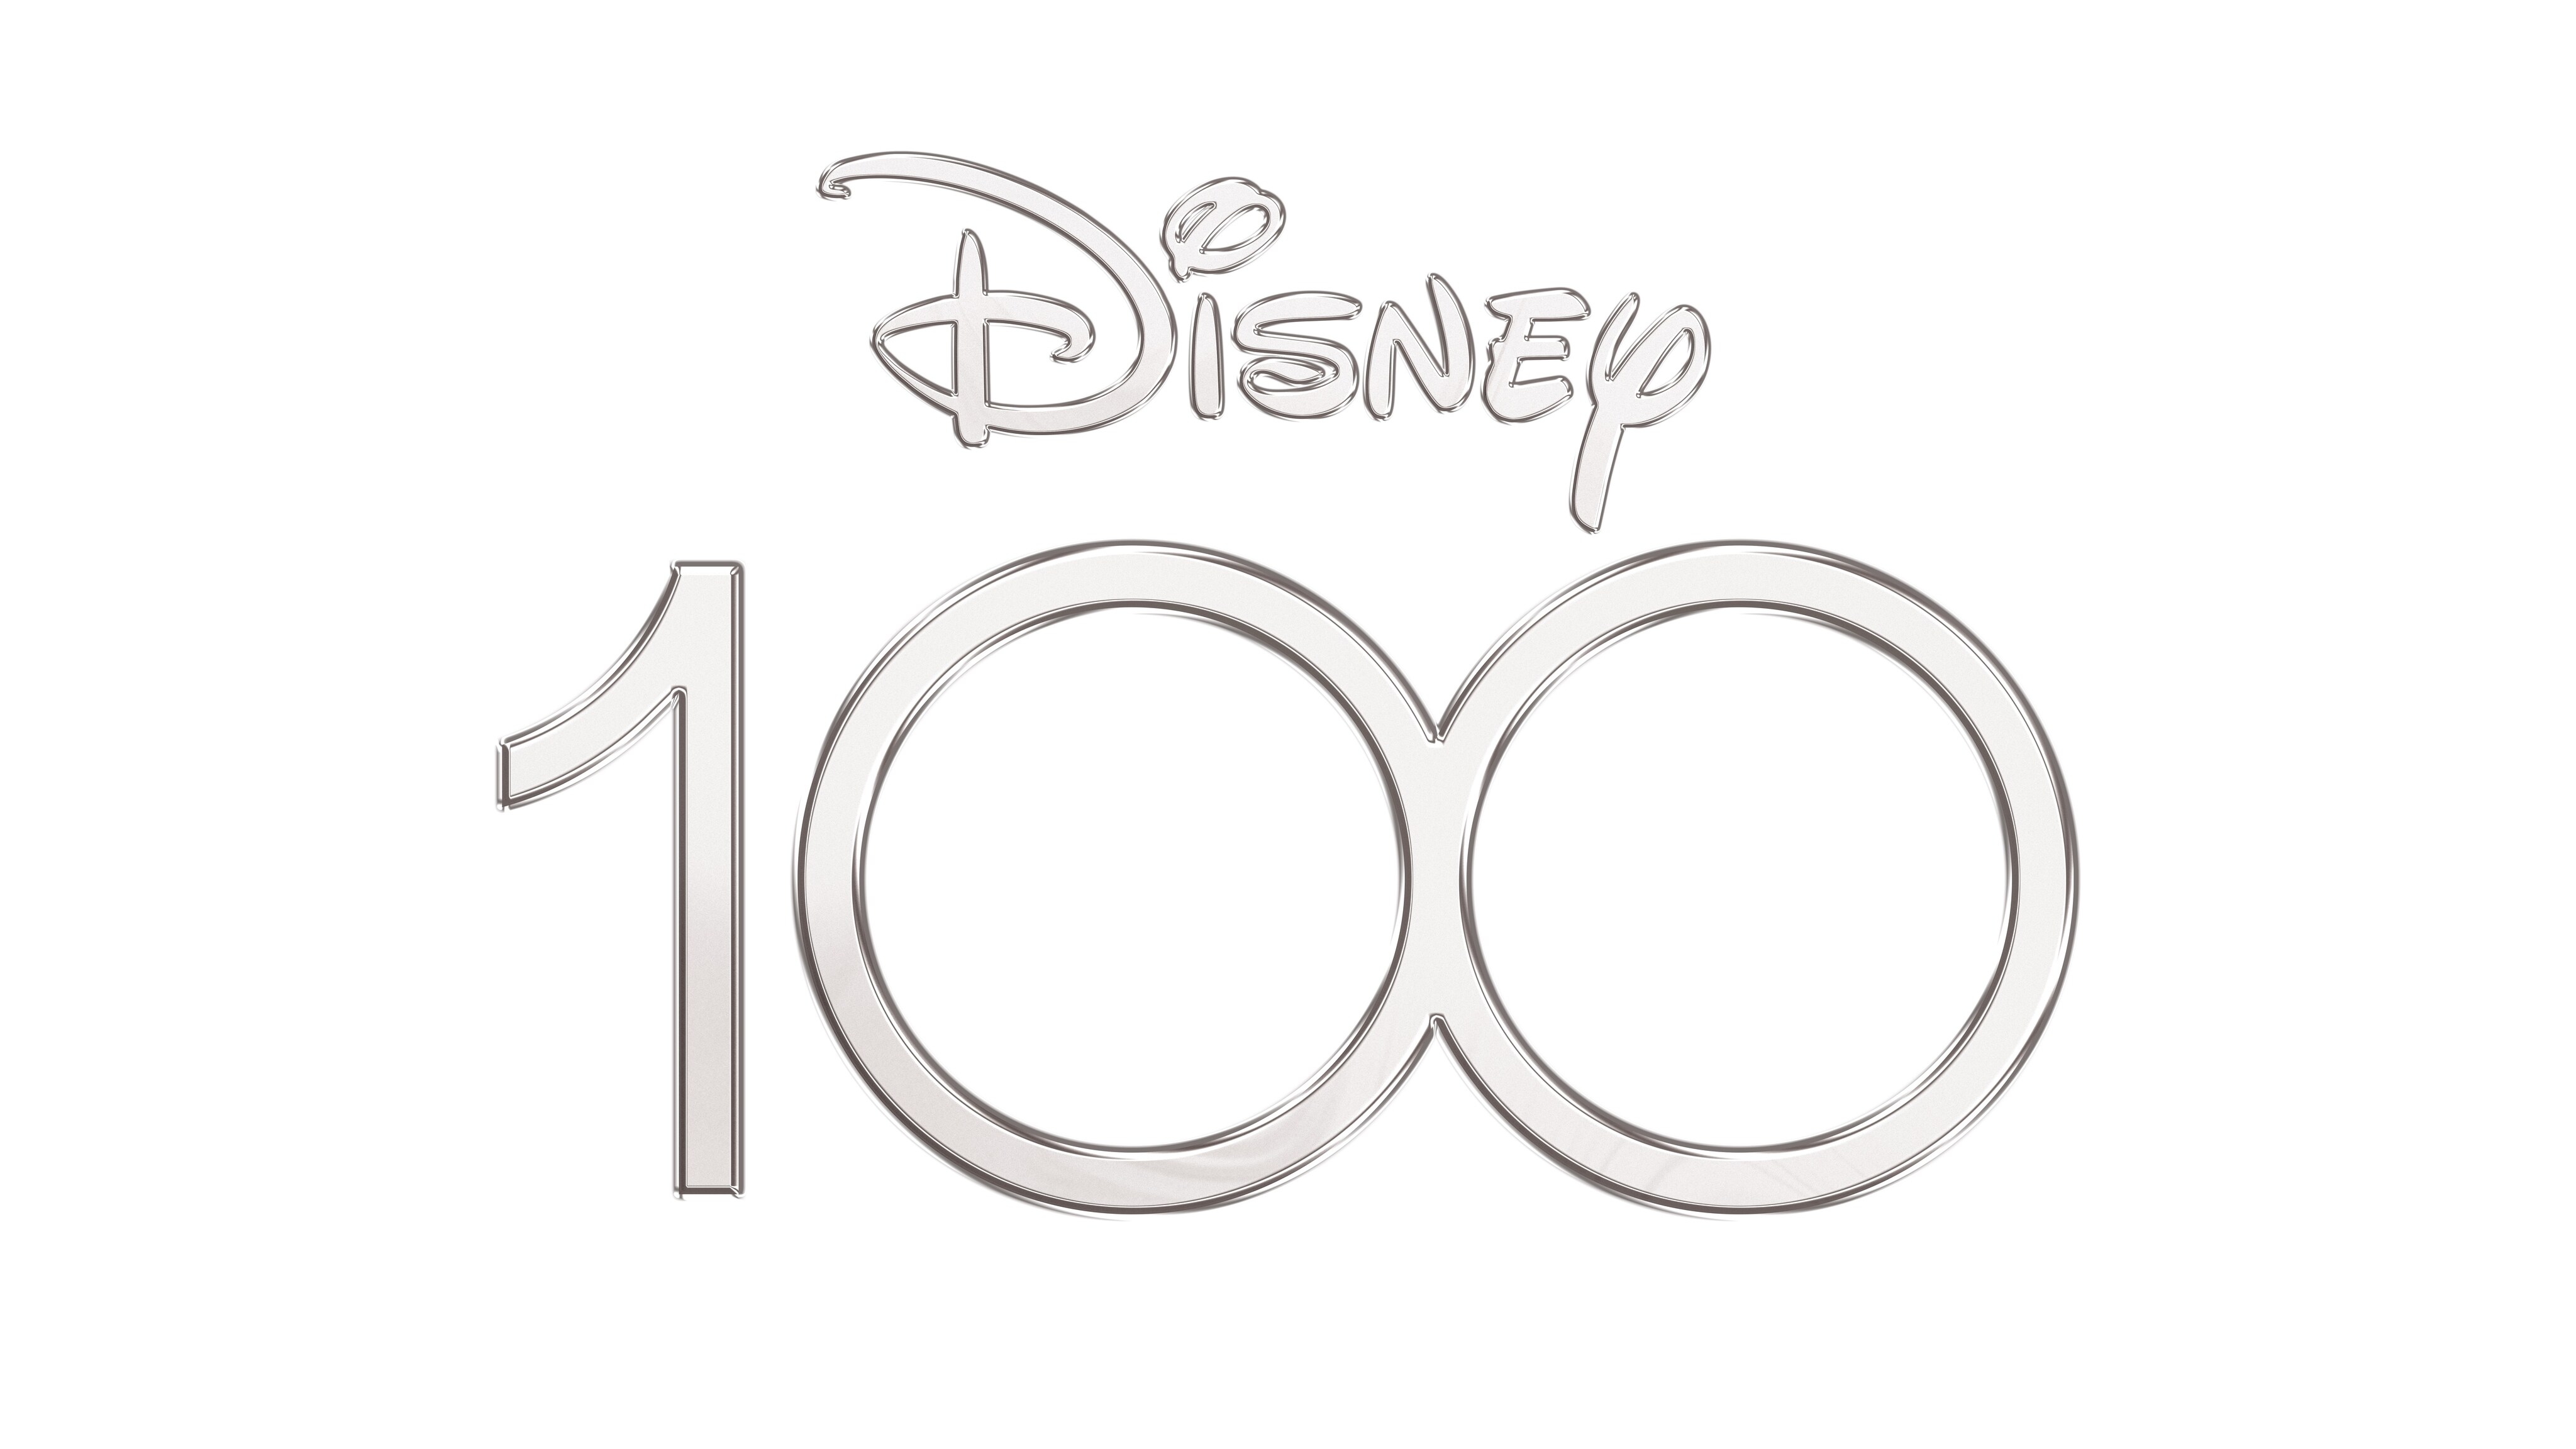 DISNEY100 'CELEBRATING TIMELESS STORIES' SCREENING PROGRAMME LAUNCHES IN  THE UK TOMORROW, FRIDAY 4TH AUGUST, 2023